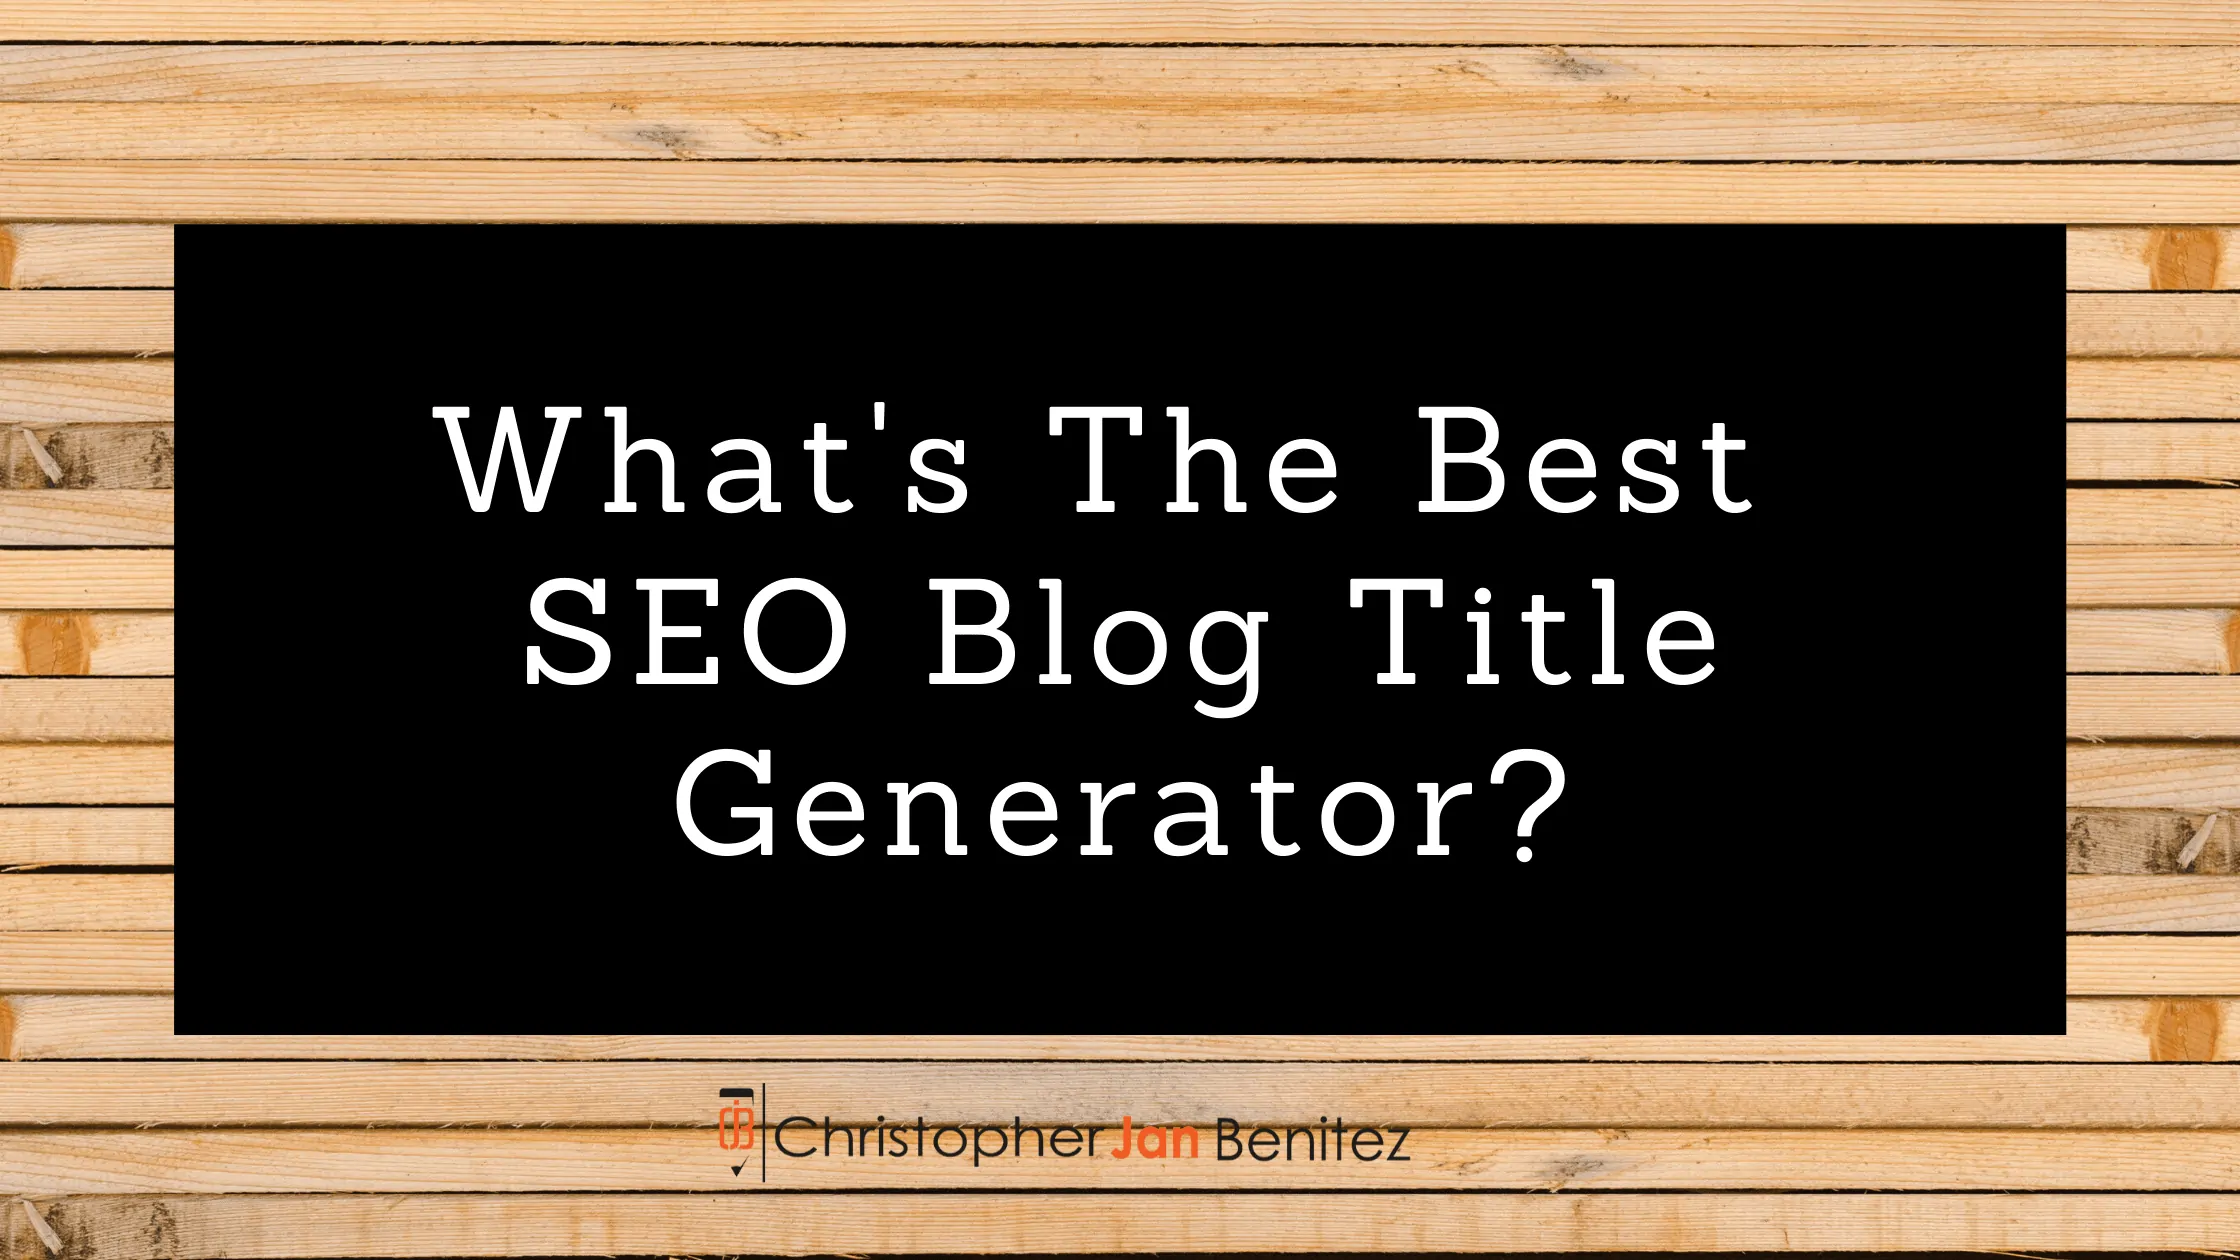 What’s The Best SEO Blog Title Generator?